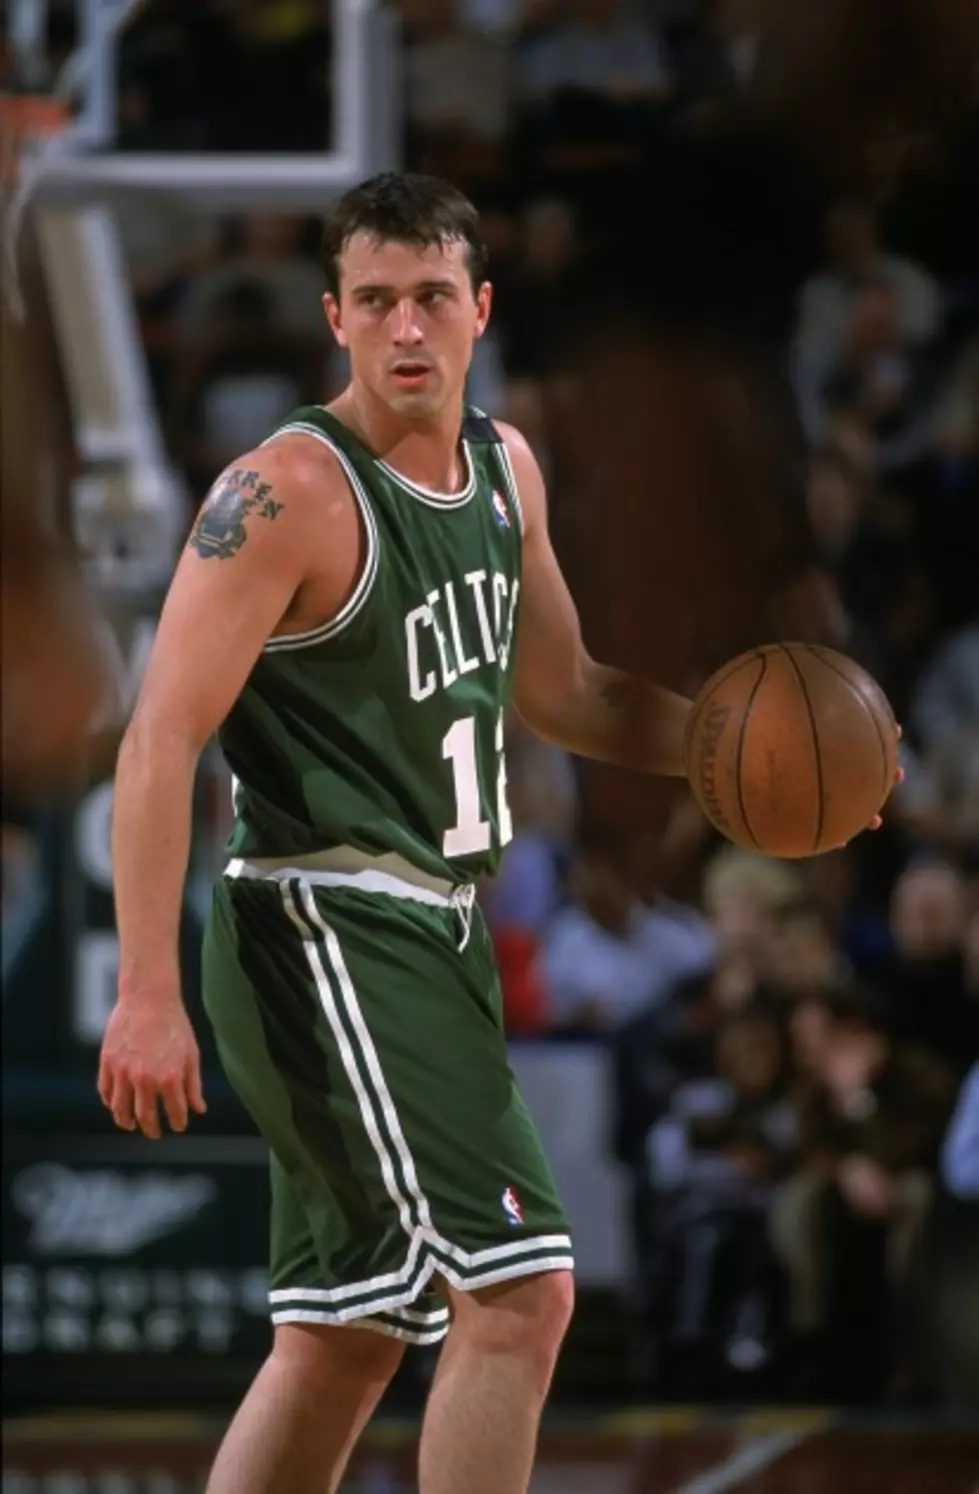 Former NBA Player Chris Herren To Talk About Past as a Drug Addict at New Milford HS [VIDEO]